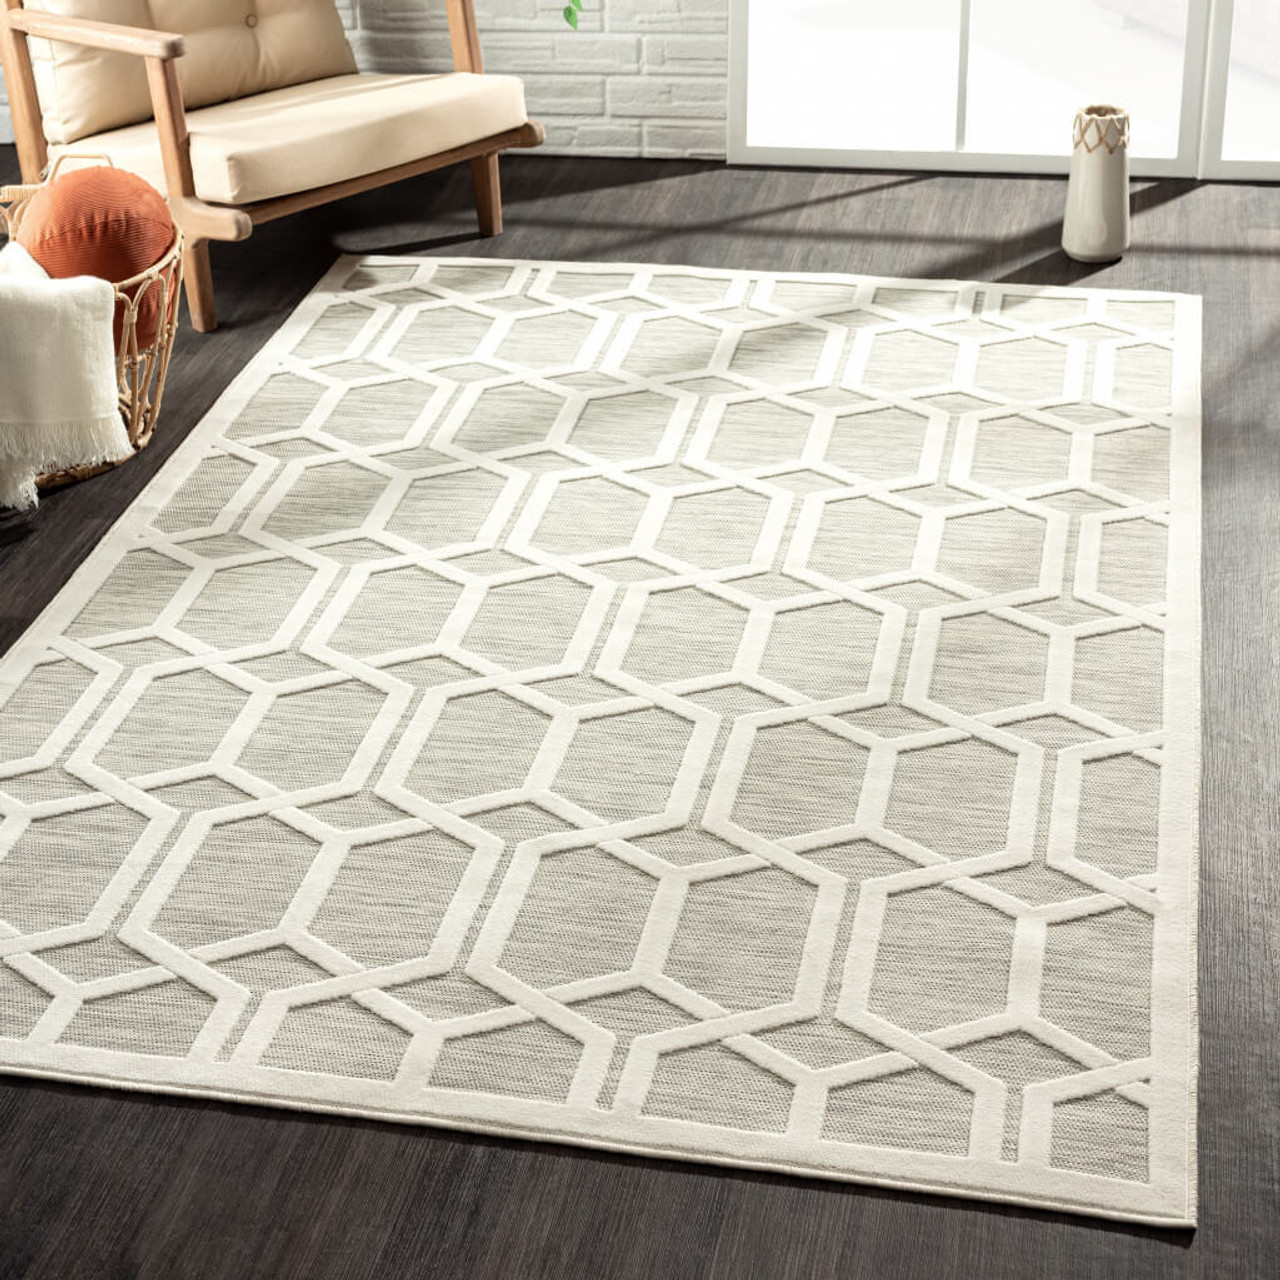 5' X 7' Gray And Ivory Geometric Stain Resistant Indoor Outdoor Area Rug